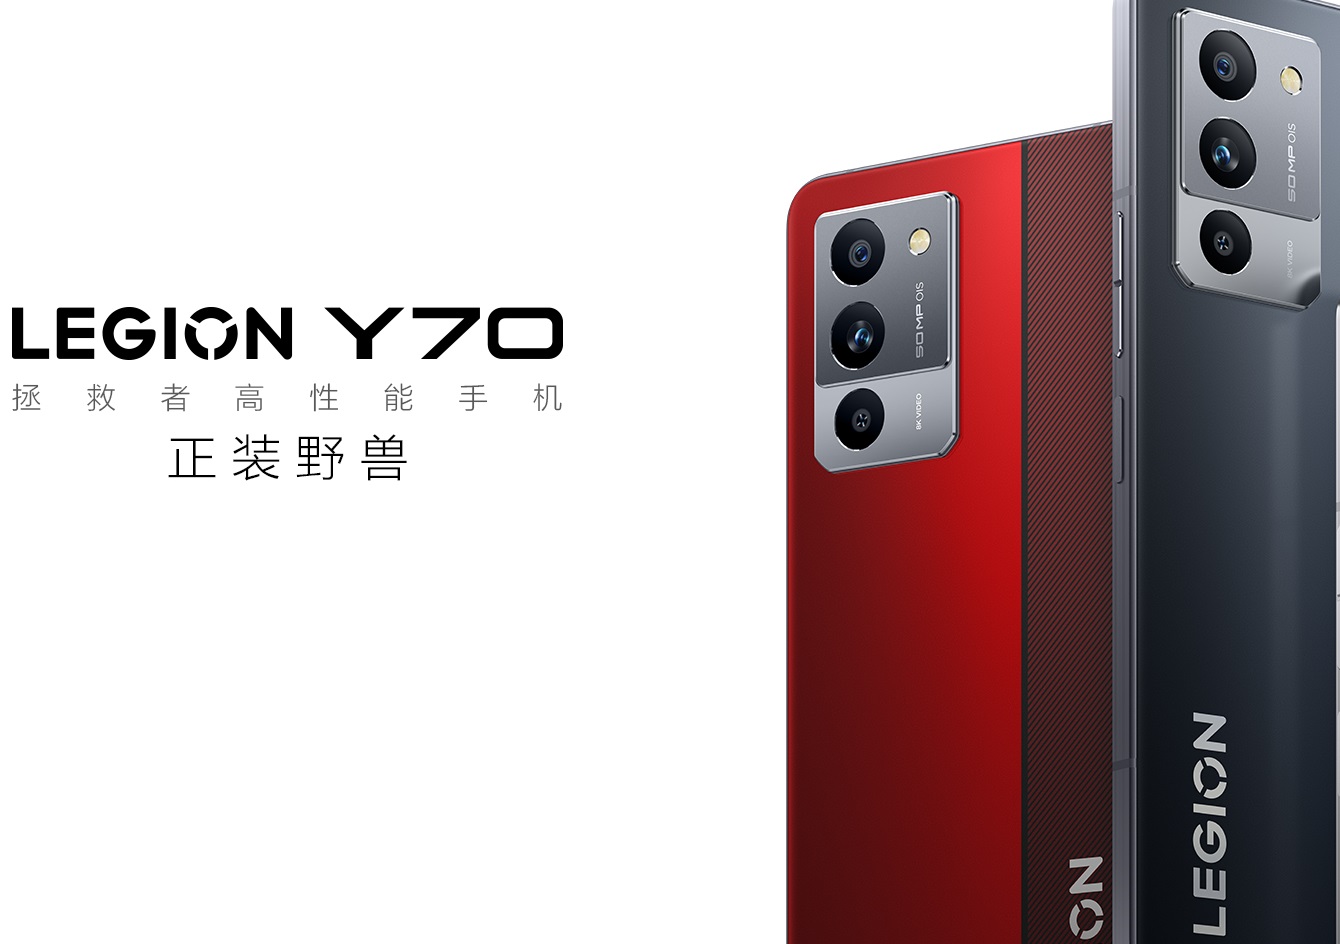 Lenovo Legion Y70: High-end smartphone model with Snapdragon 8+ Gen1 and a built-in cooling mechanism announced | DroidAfrica